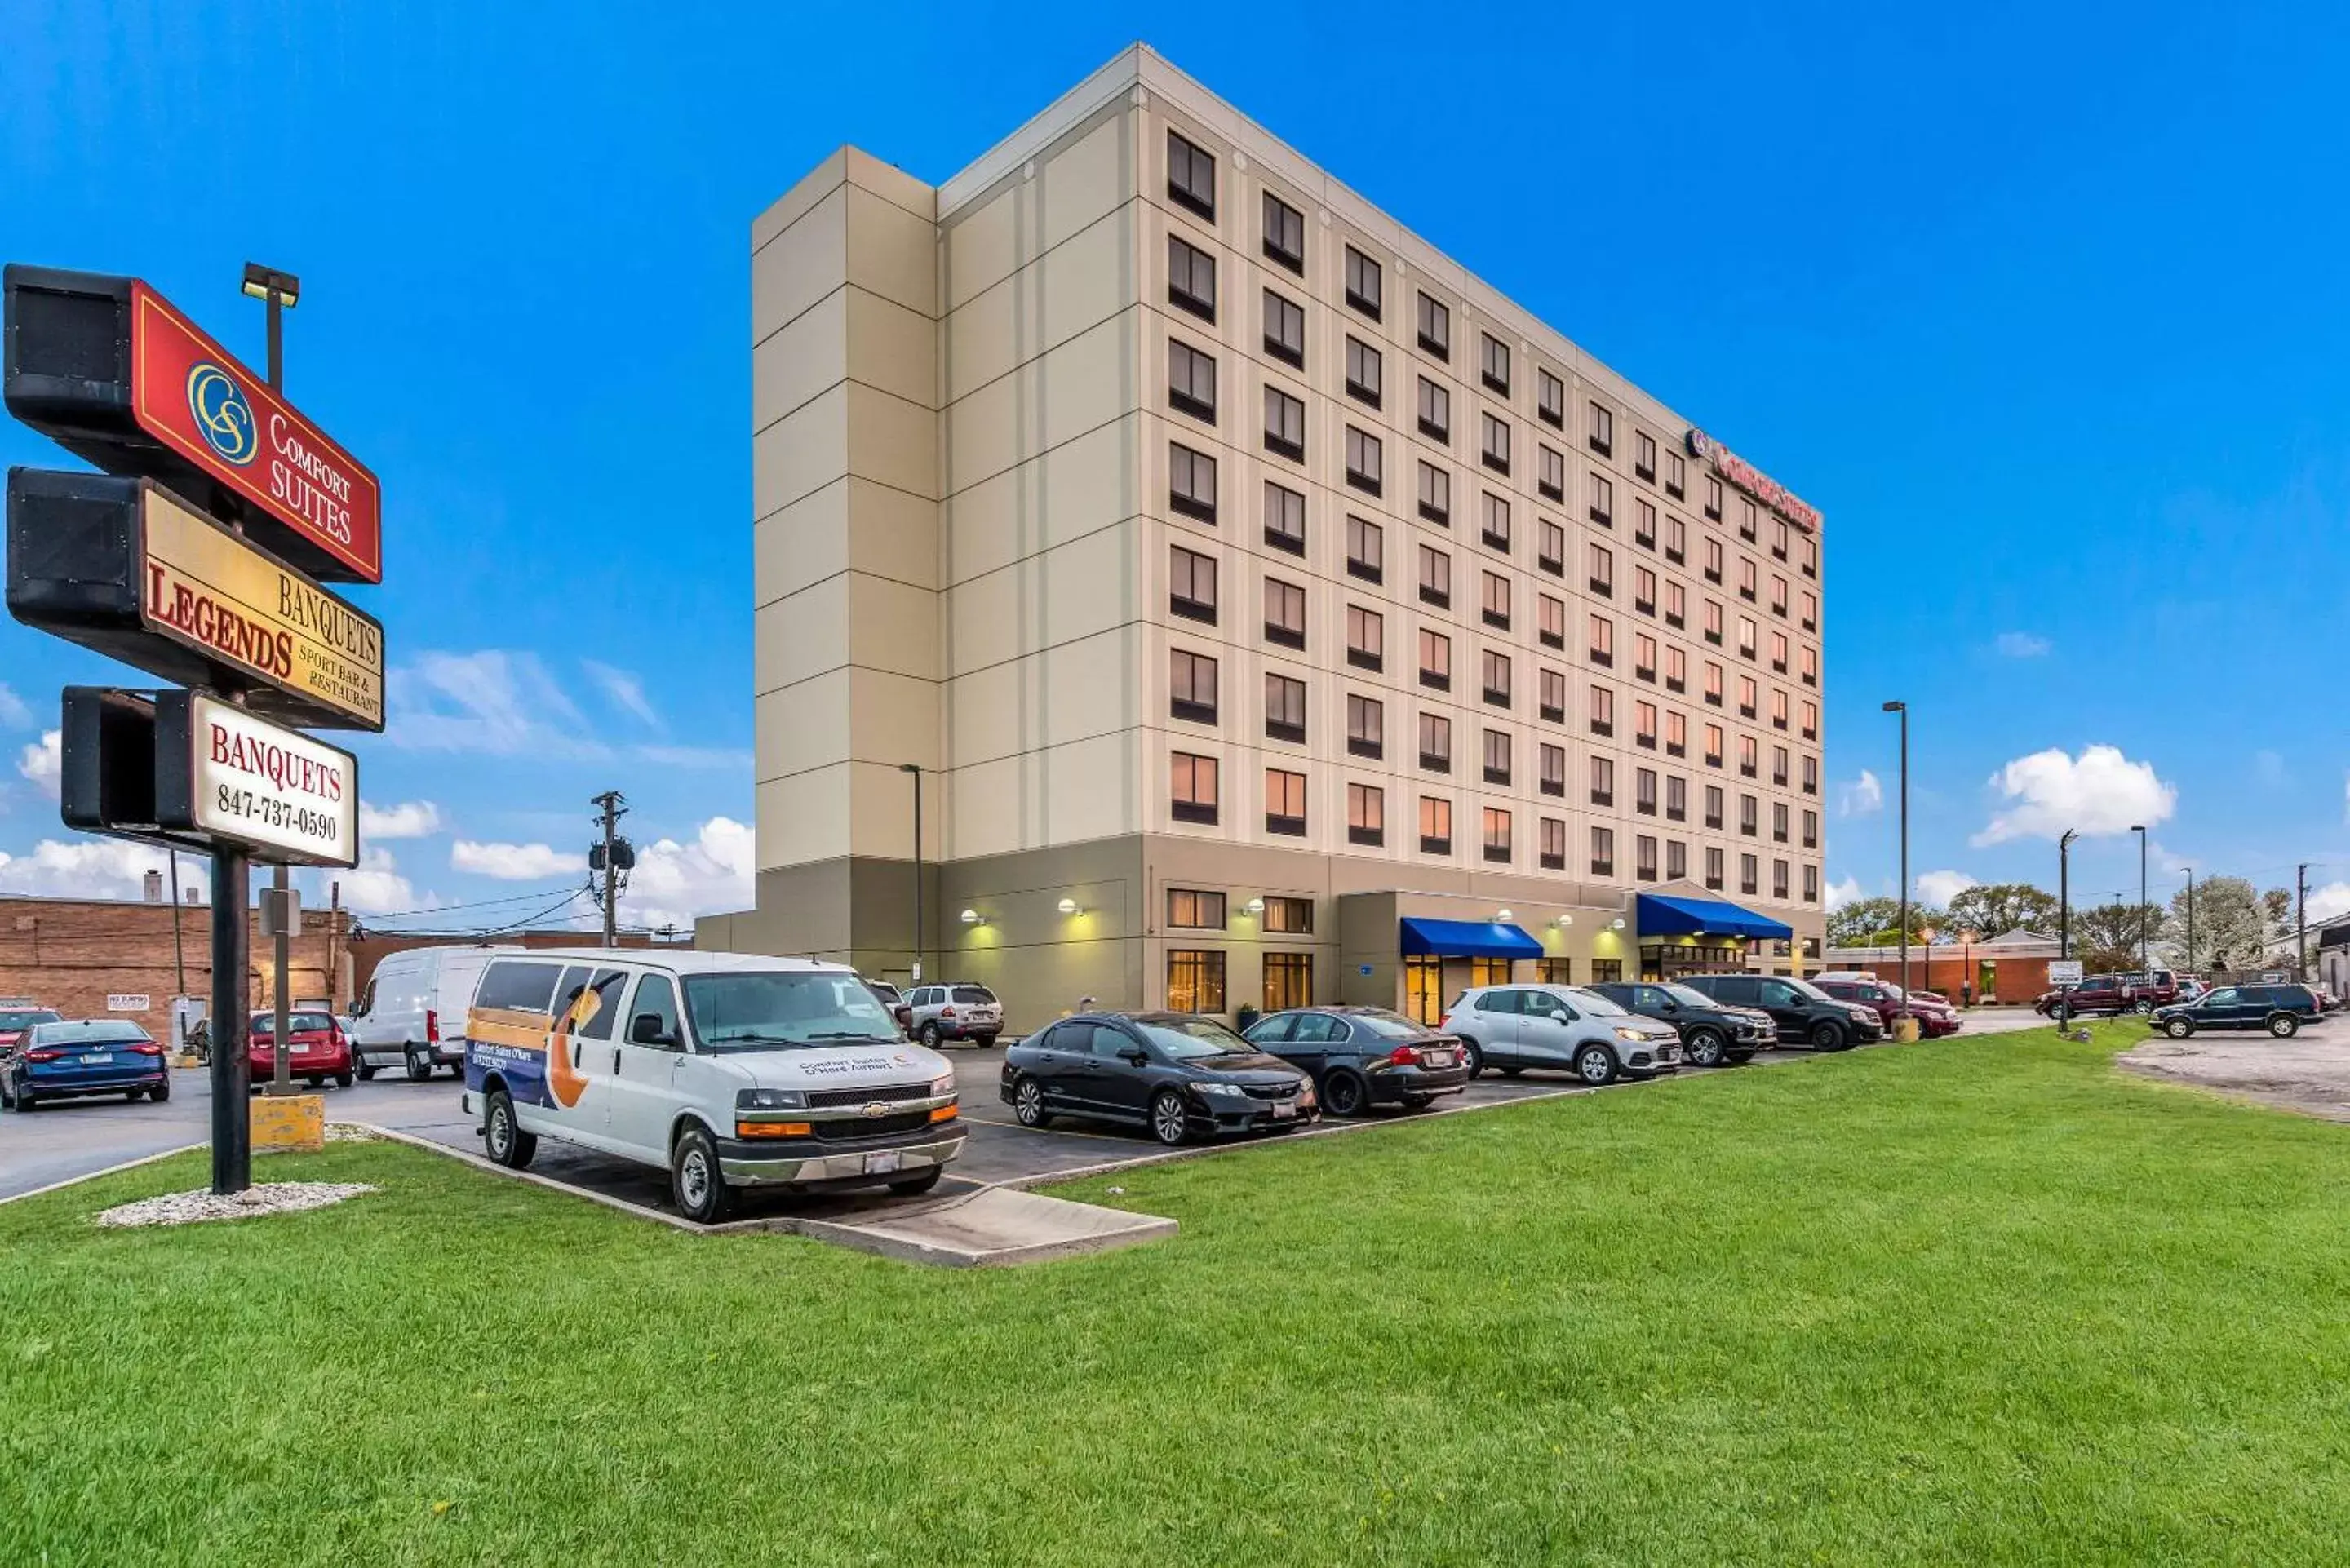 Property building in Comfort Suites Chicago O'Hare Airport